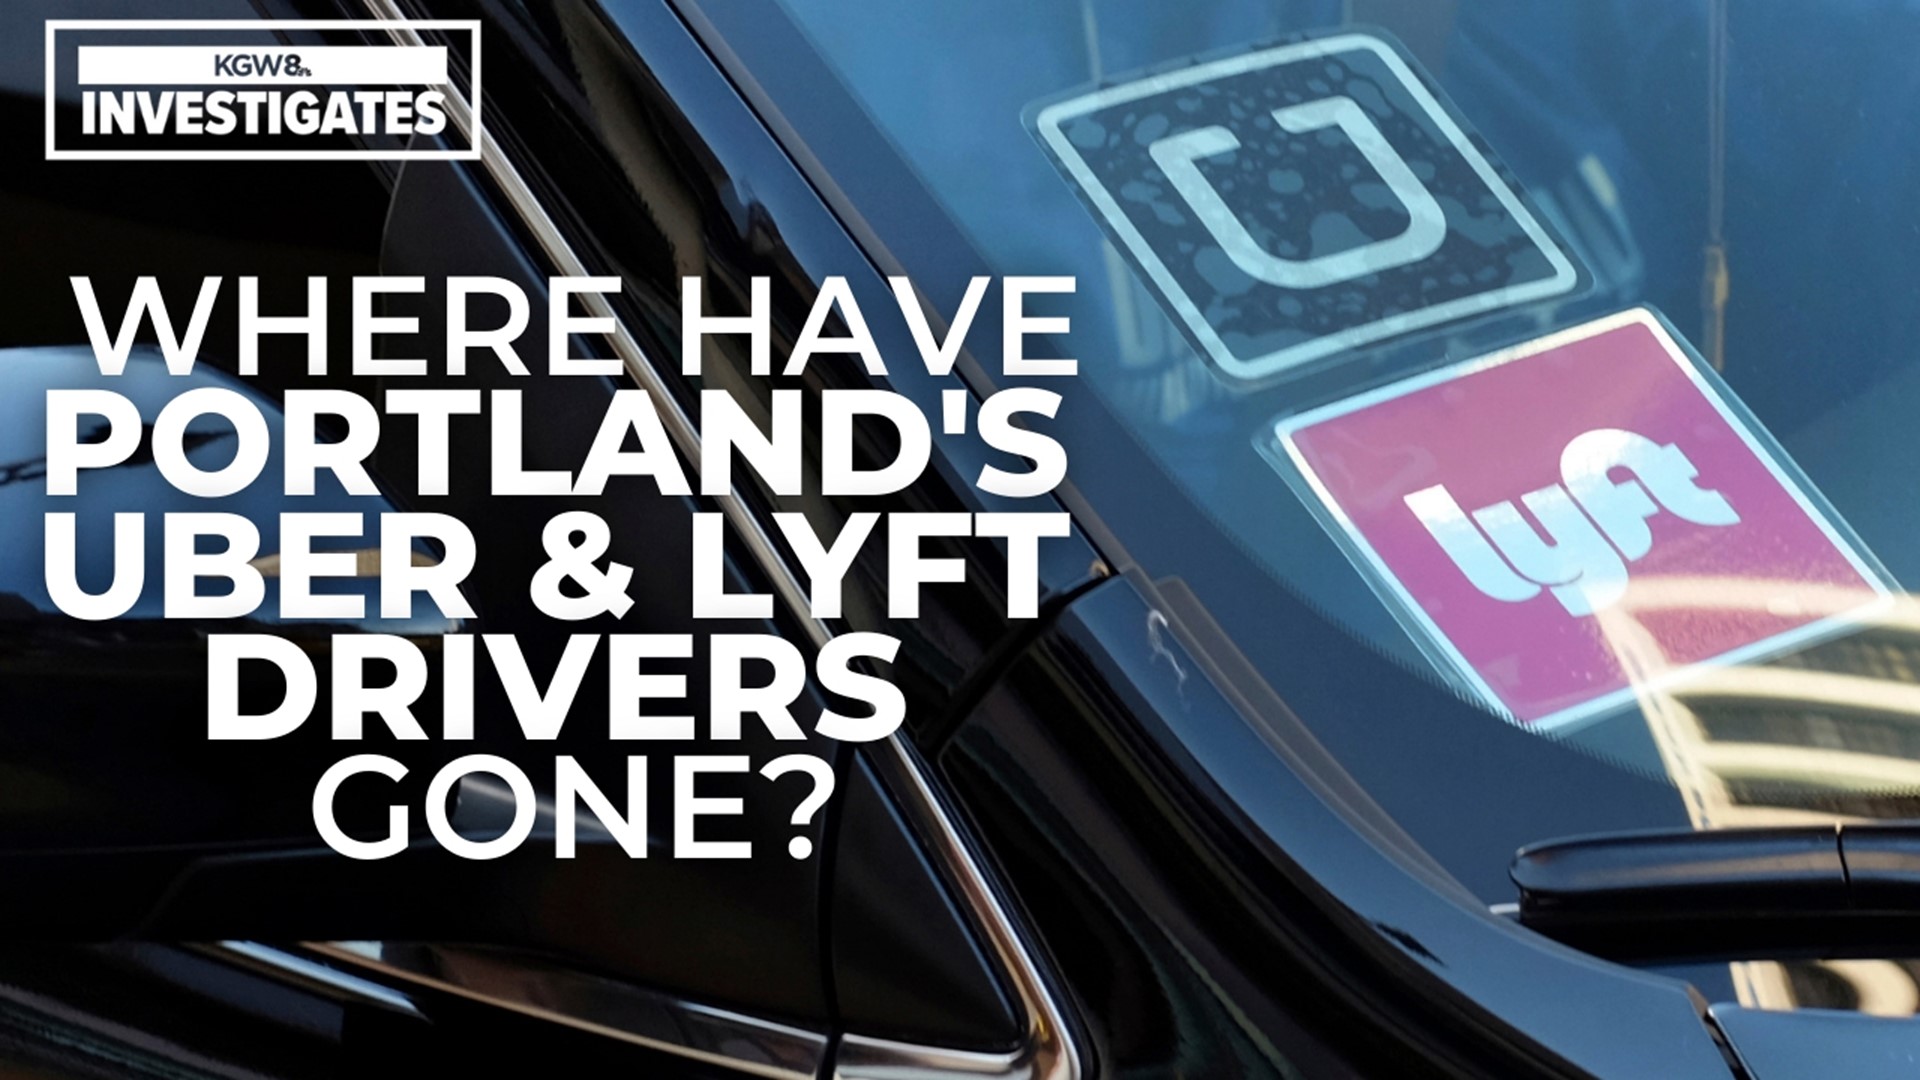 Today, there are roughly 6,500 Uber, Lyft and taxi drivers in the city of Portland, compared to 17,000 three years ago.